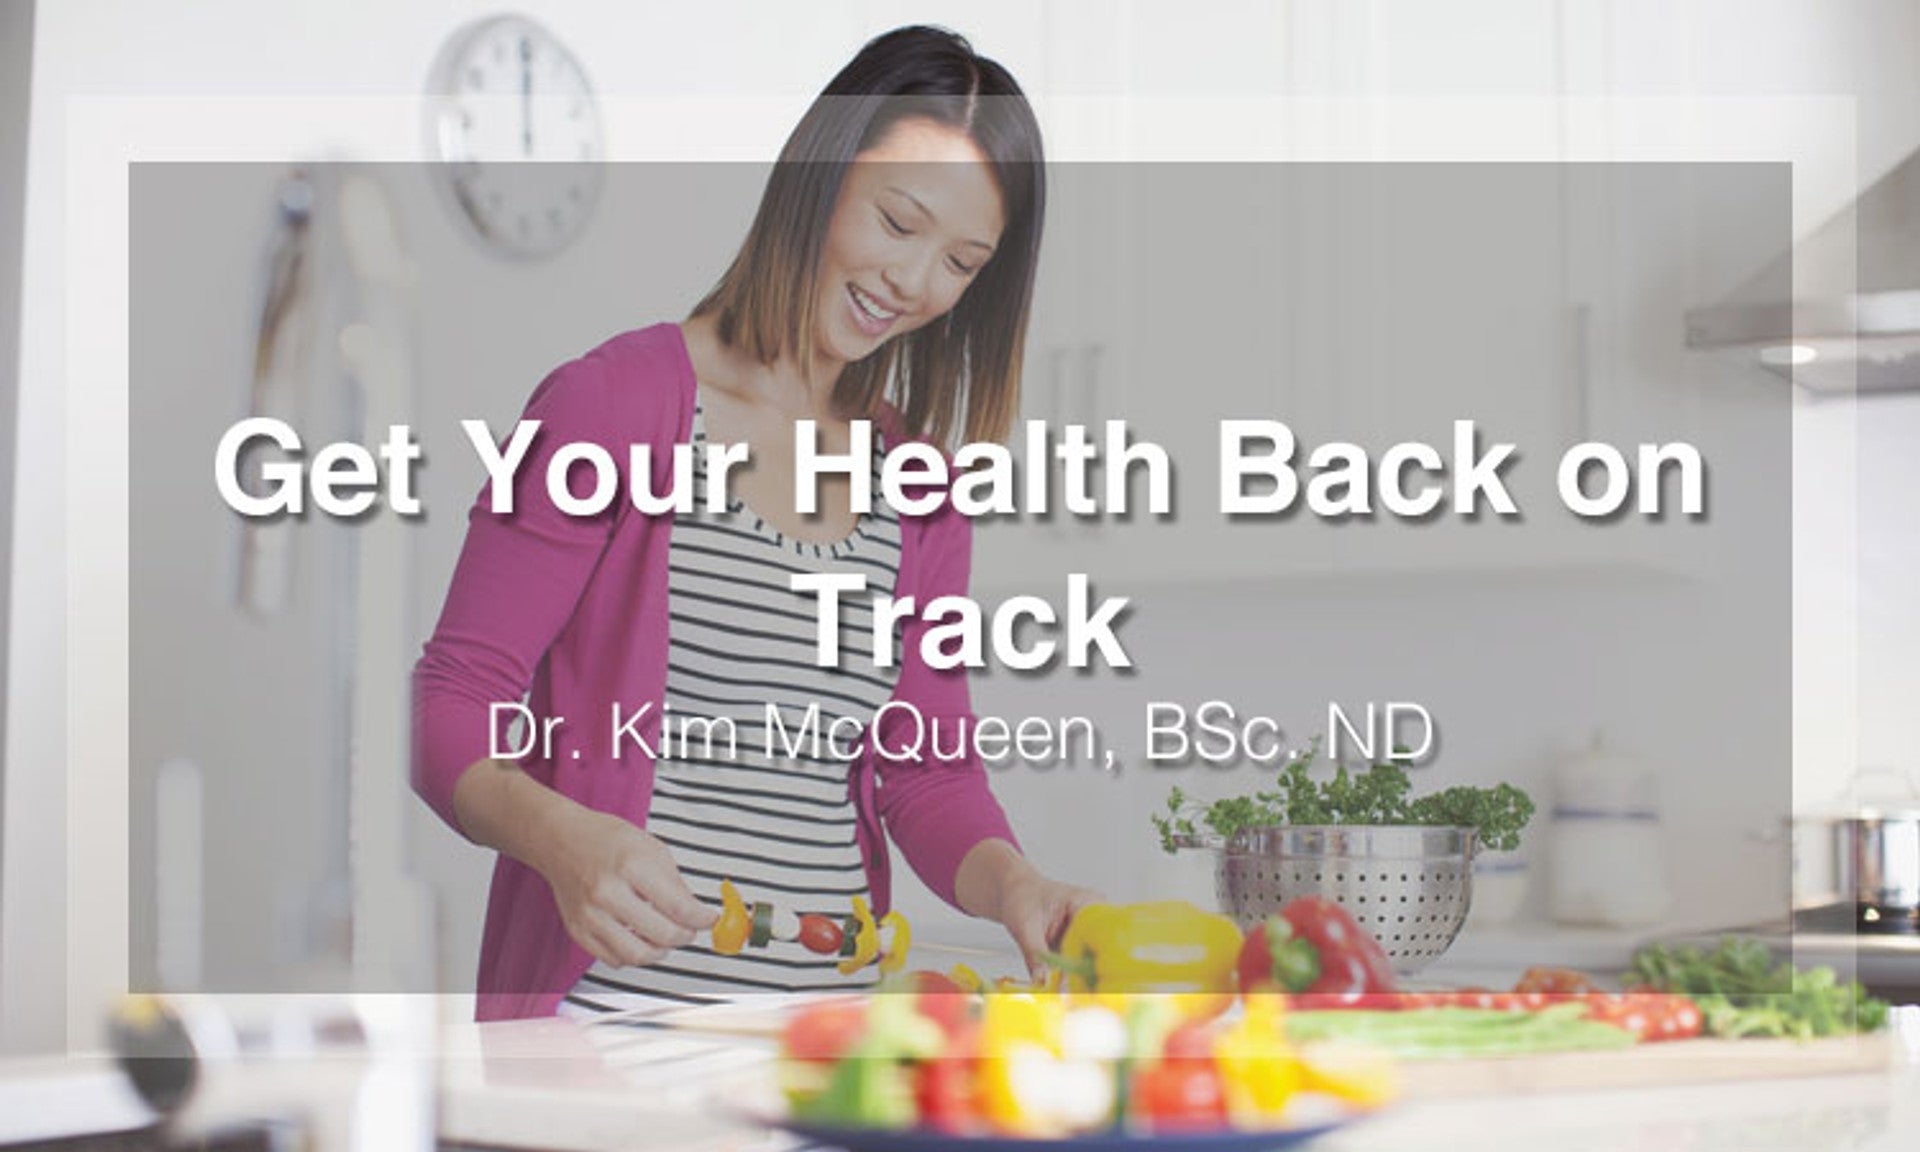 Get Your Health Back on Track